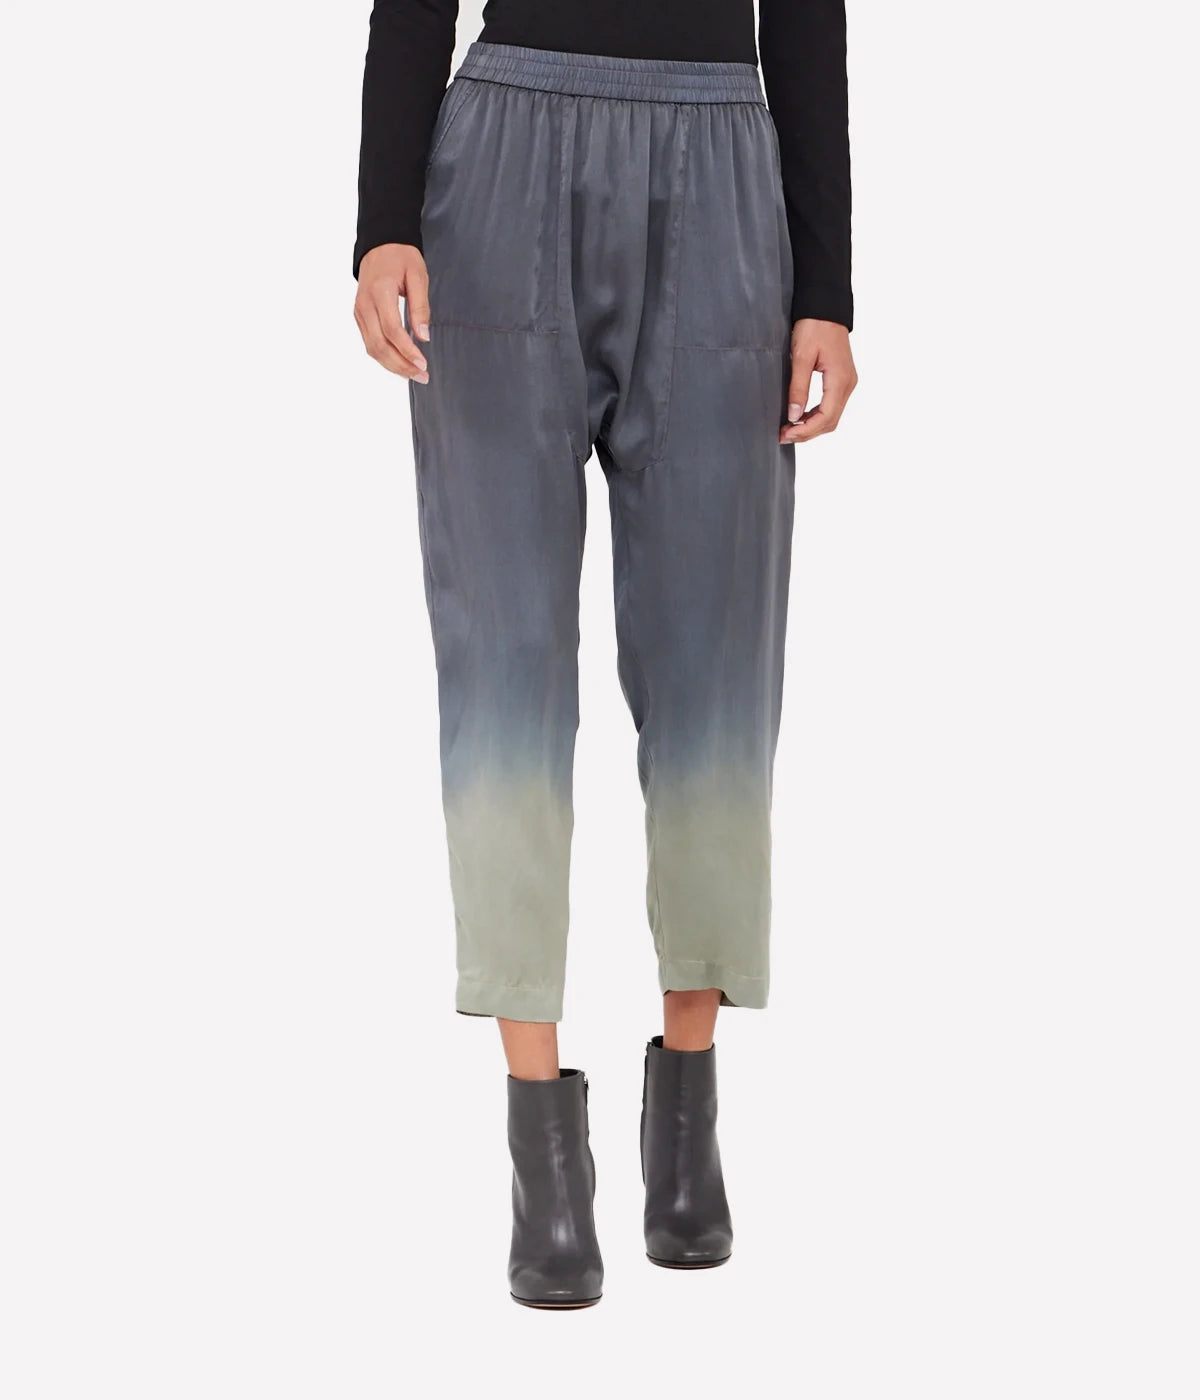 Sunday Pant in Sage Charcoal